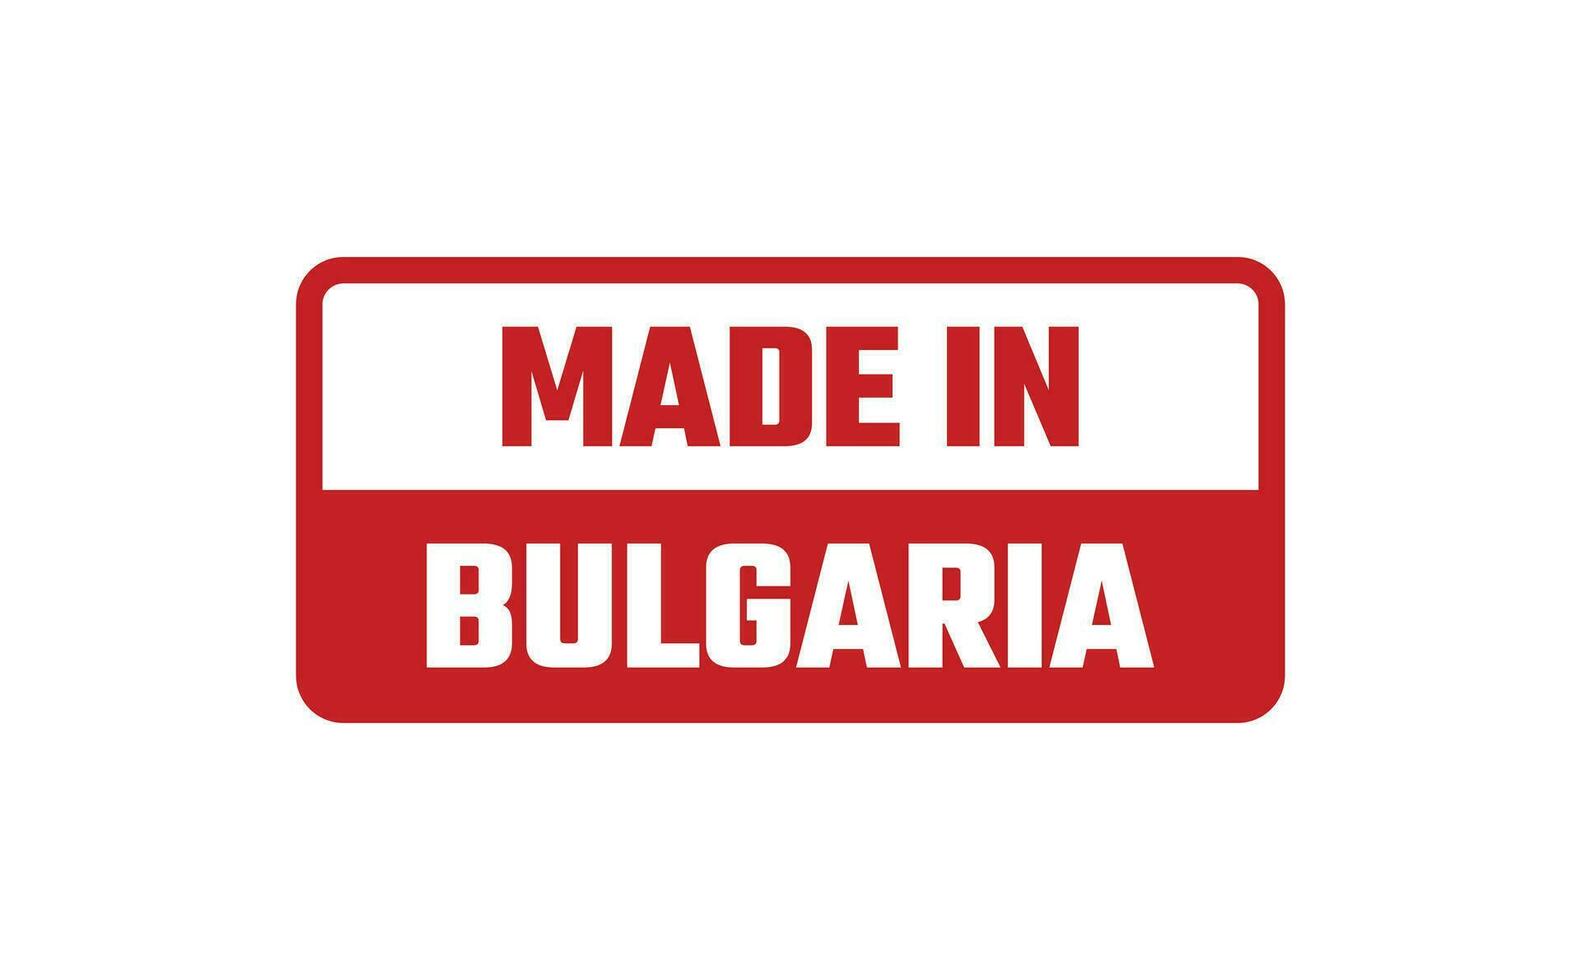 Made In Bulgaria Rubber Stamp vector